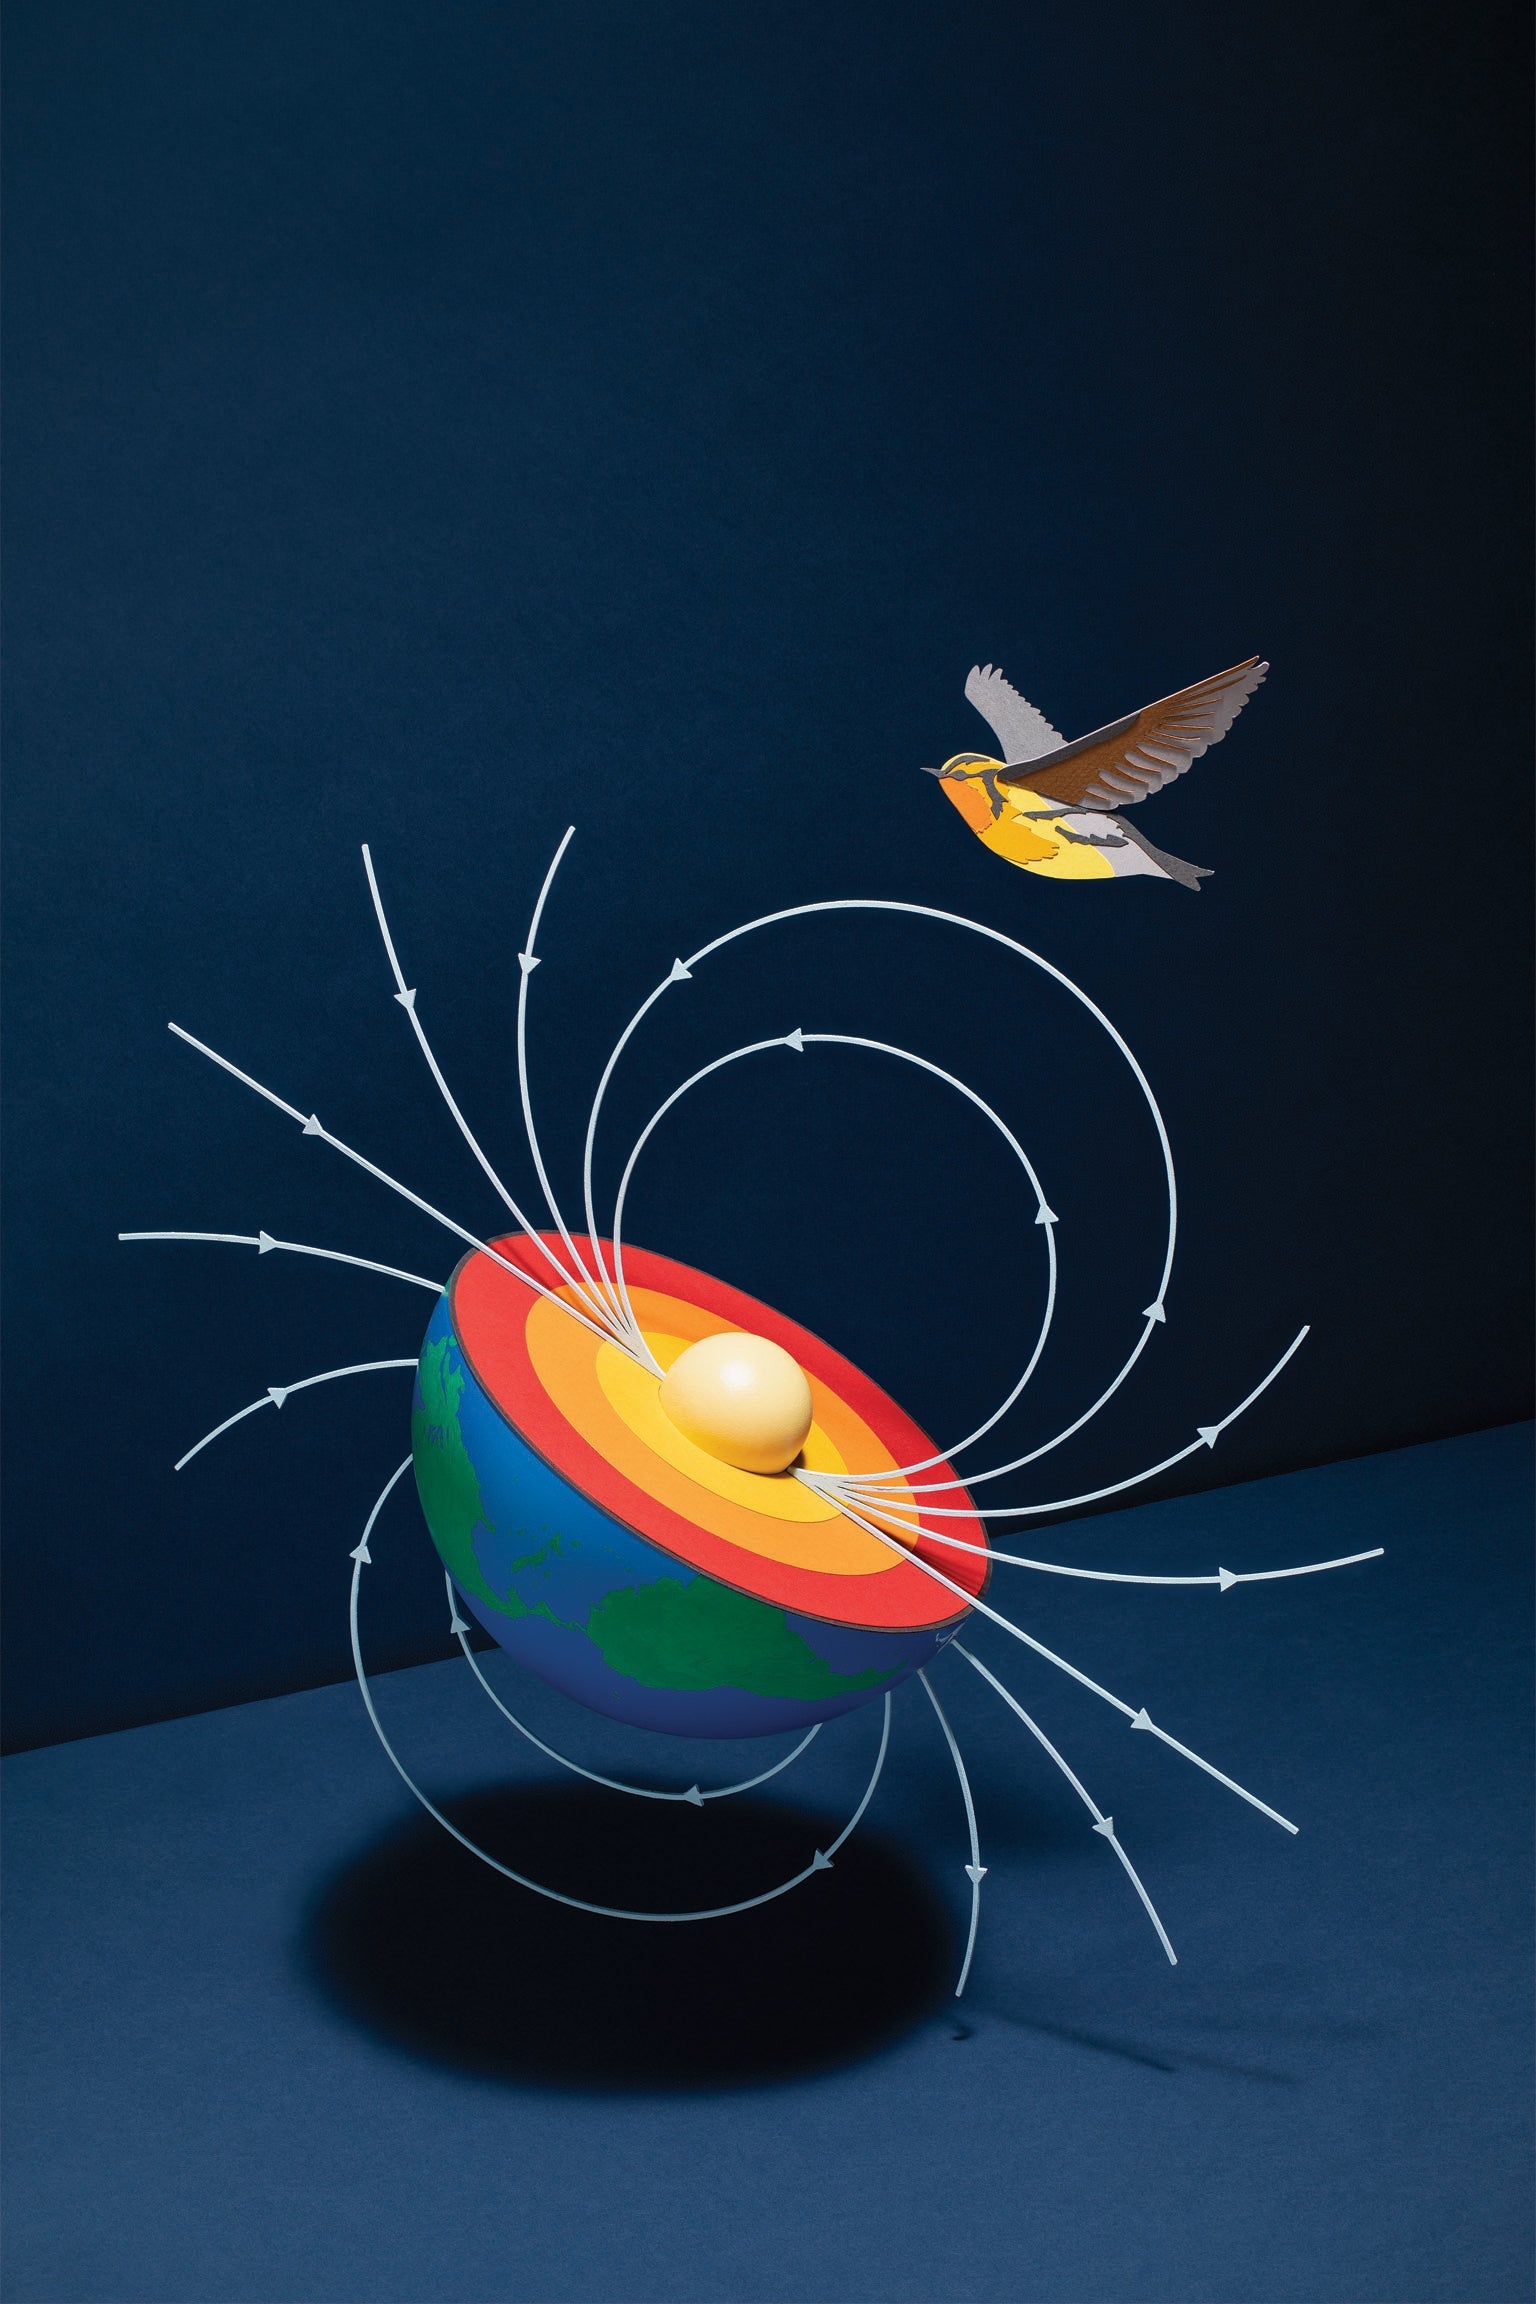 How Migrating Birds Use Quantum Effects to Navigate - Scientific American